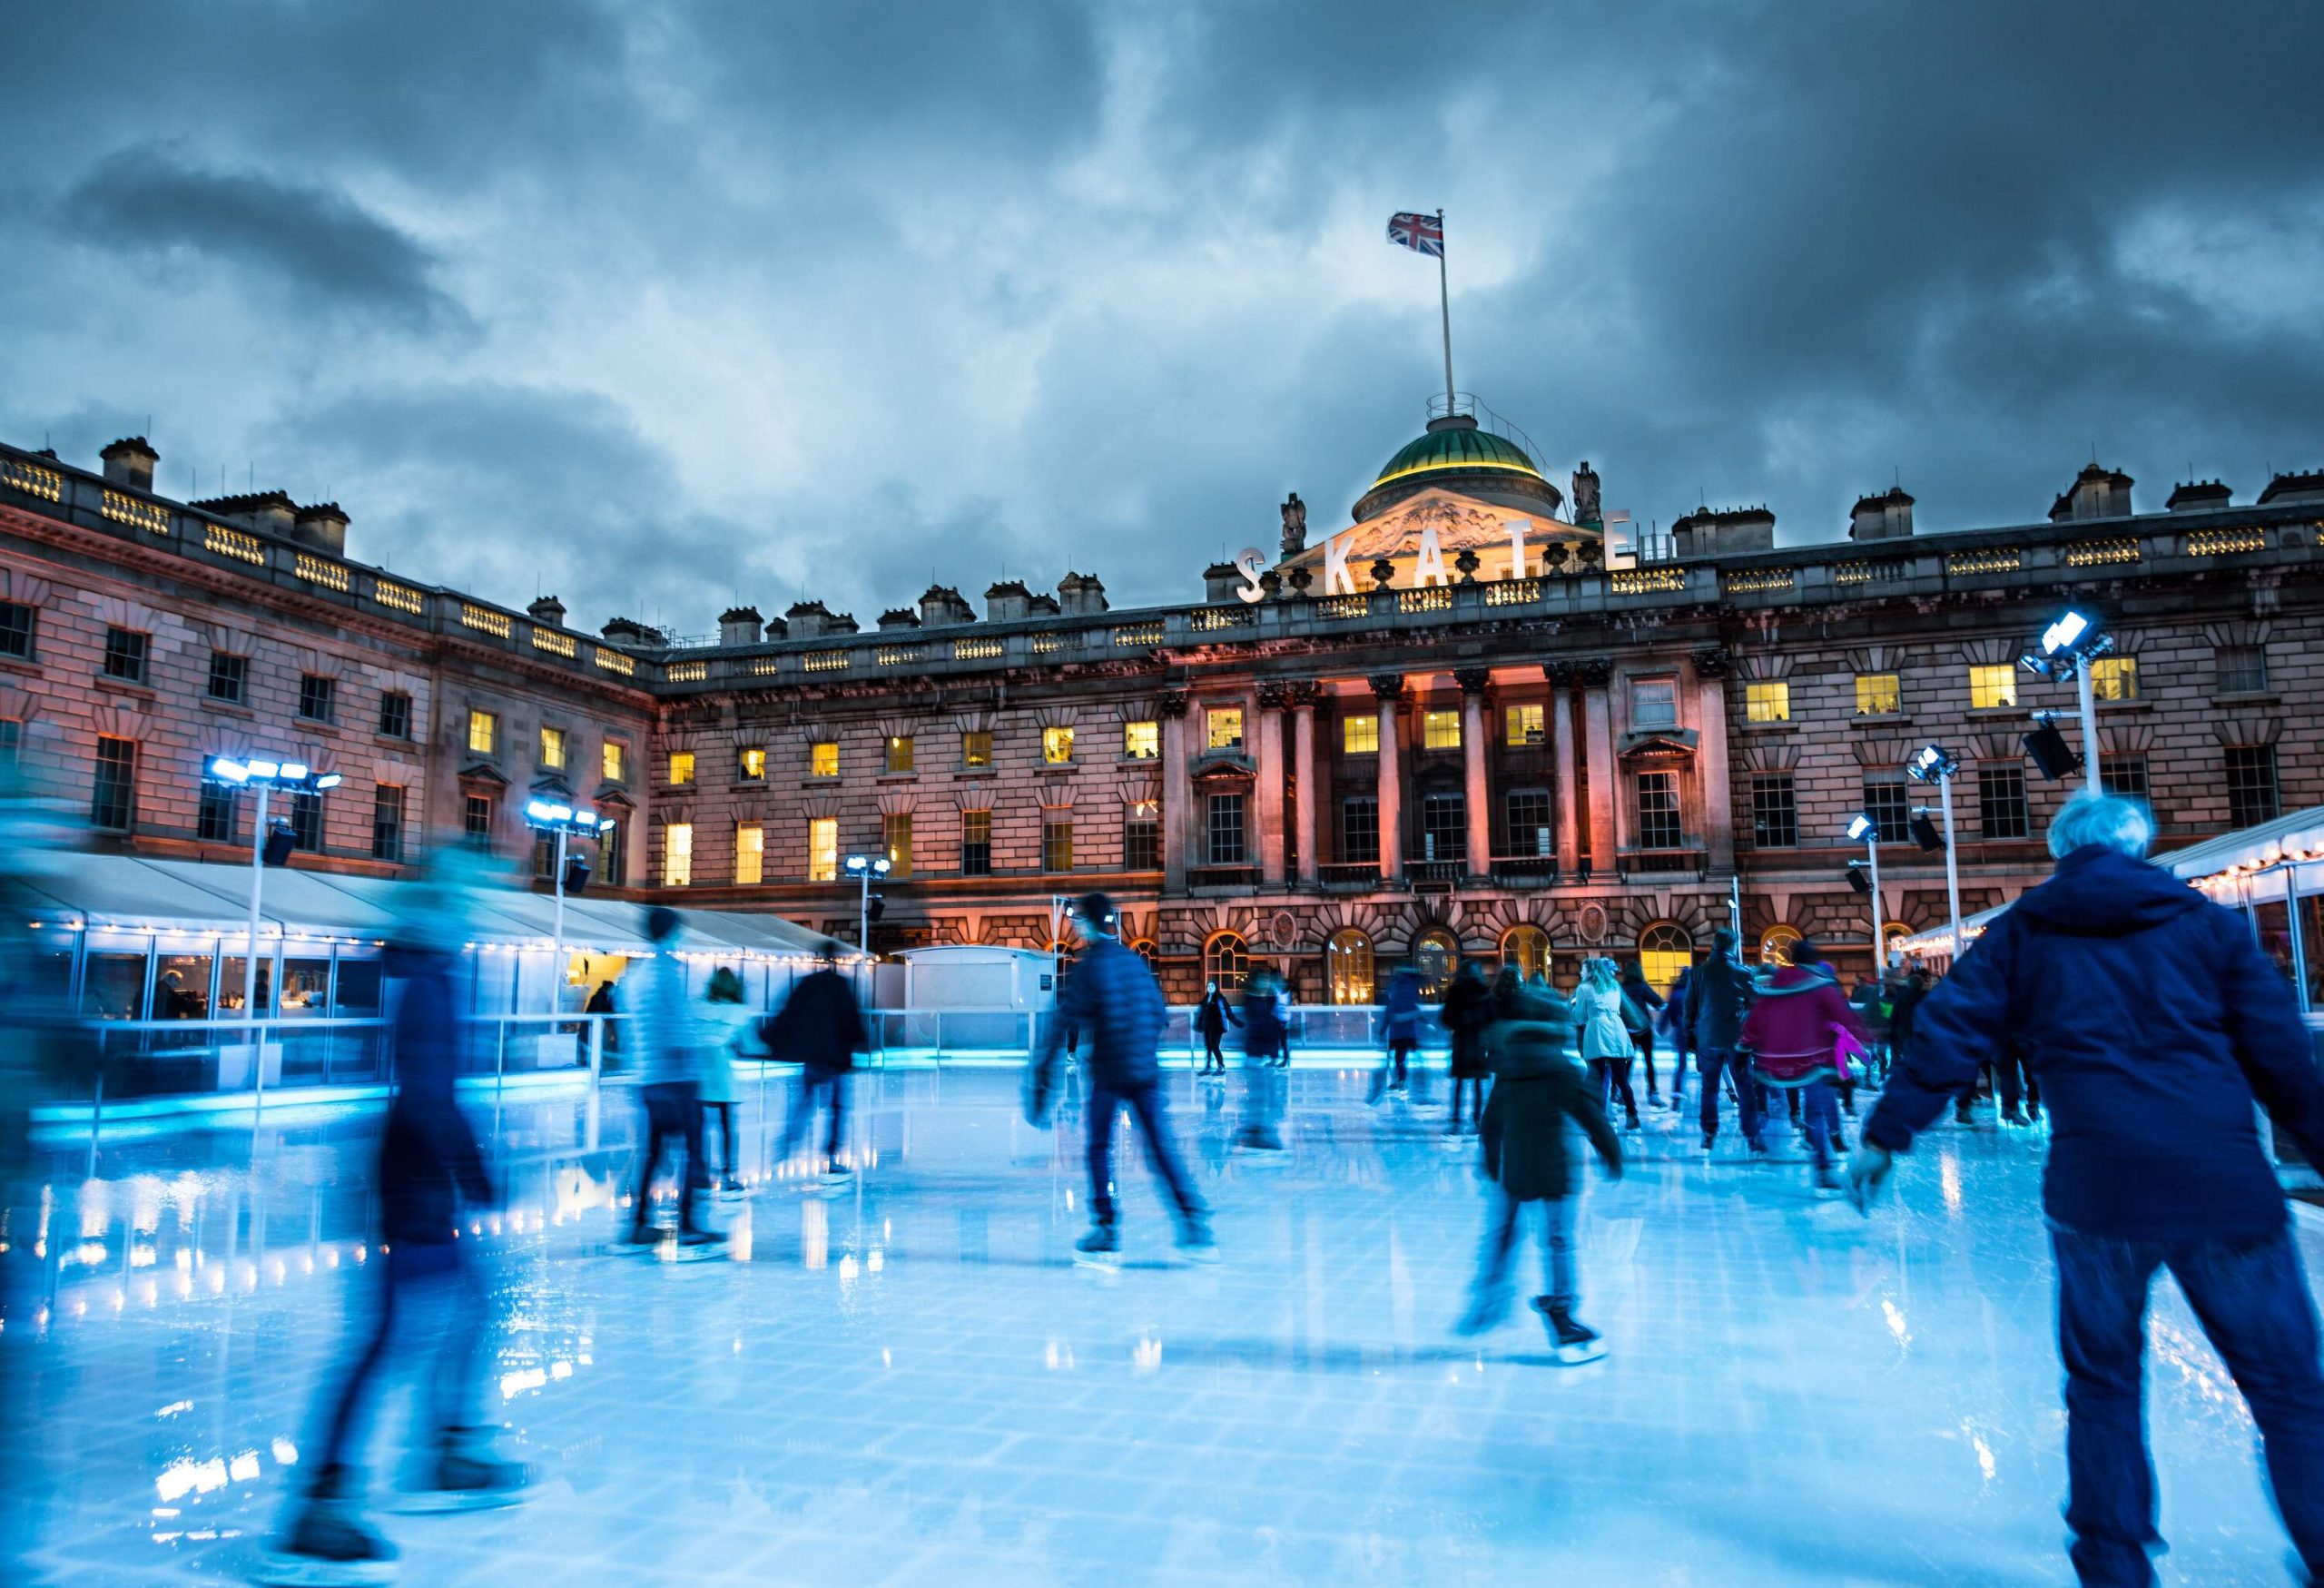 Blurred motion of crowds of people ice skating at Somerset House, a publically owned building in central London. The image features warm evening light, and an ominous, moody sky. The people appear as unrecognisable blurs due to the long exposure used. Somerset House is a large Neoclassical building situated on the south side of the Strand in central London, overlooking the River Thames, just east of Waterloo Bridge.